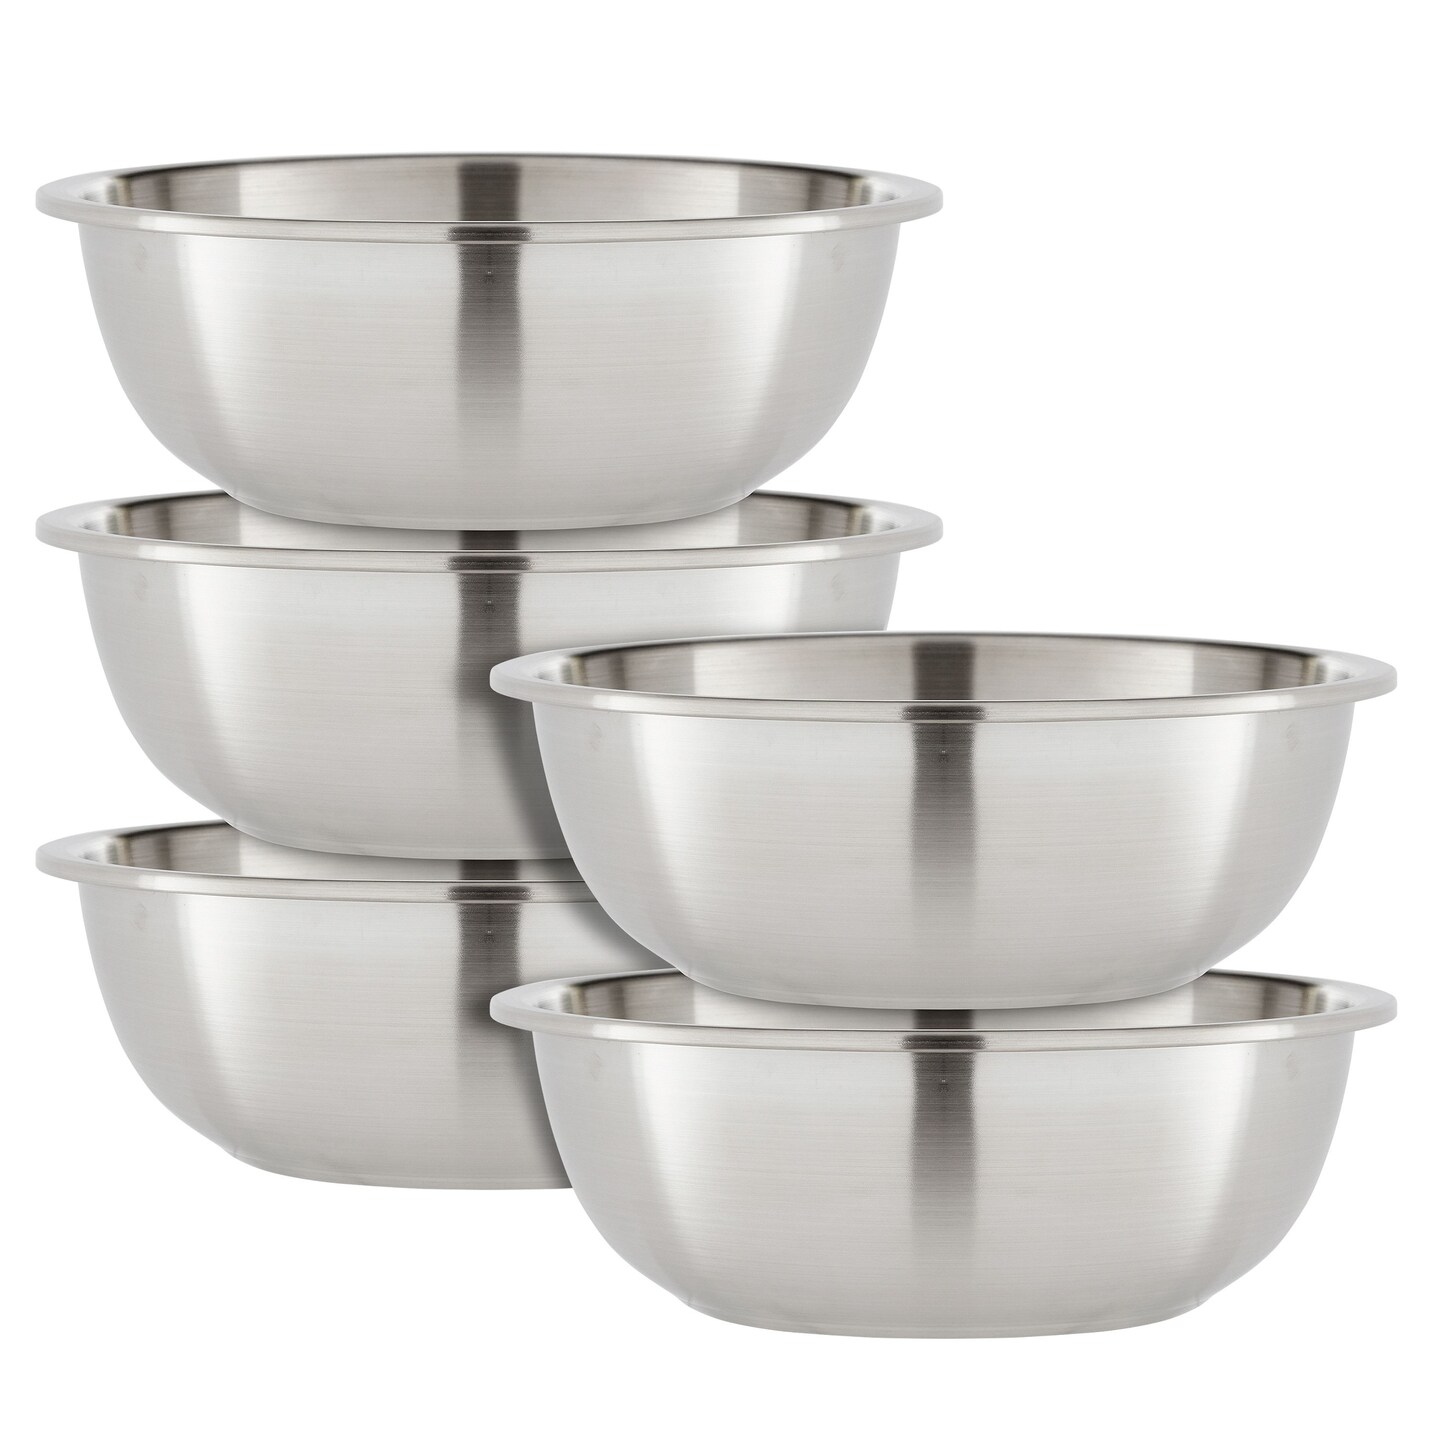 1.5 Qt Stainless Steel Mixing Bowls for Kitchen, Baking, Cooking